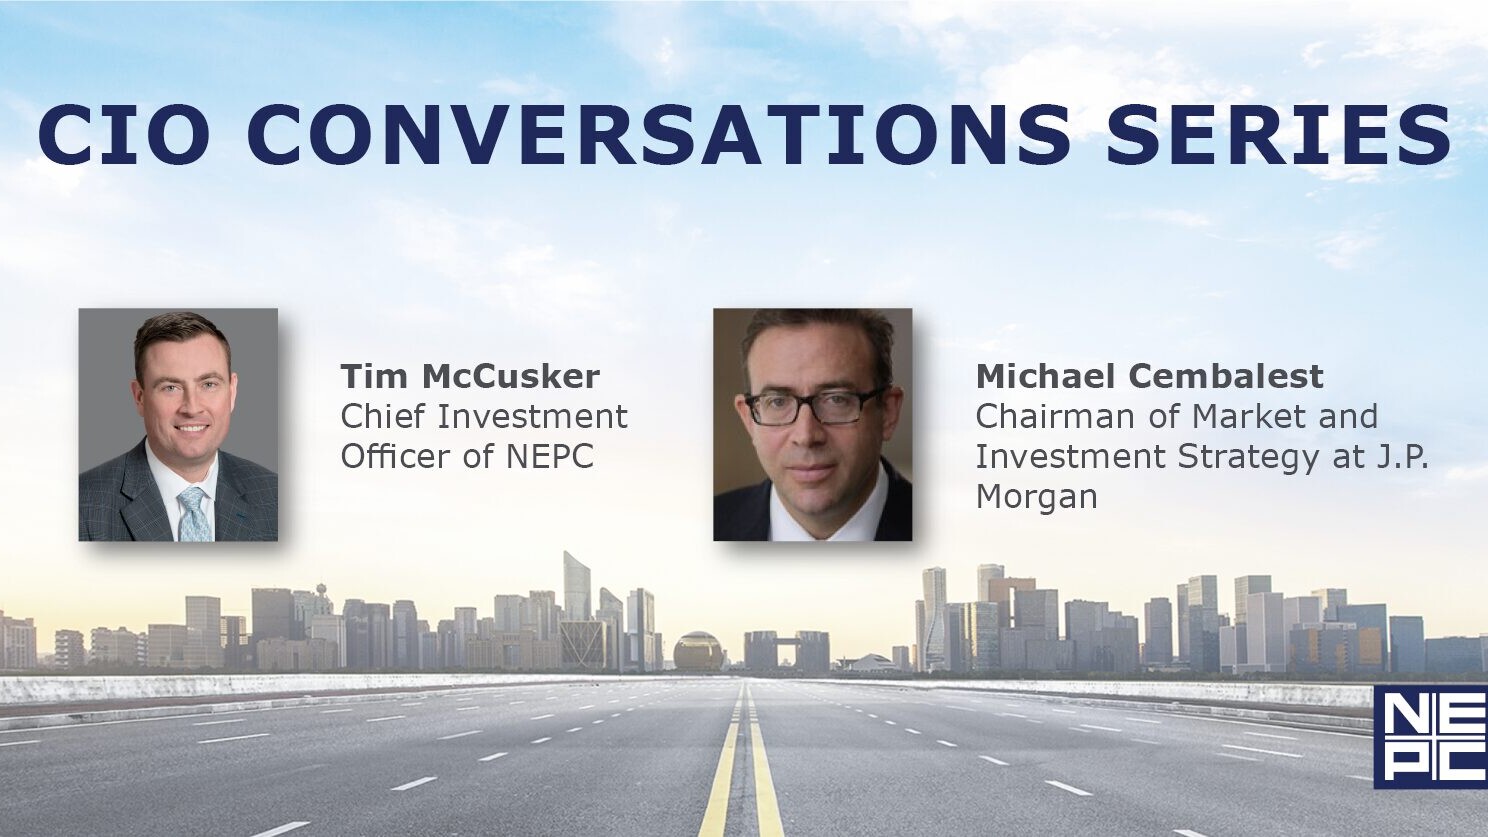 UNEPC's CIO Conversations: Market Impacts of COVID-19 with Michael Cembalest.